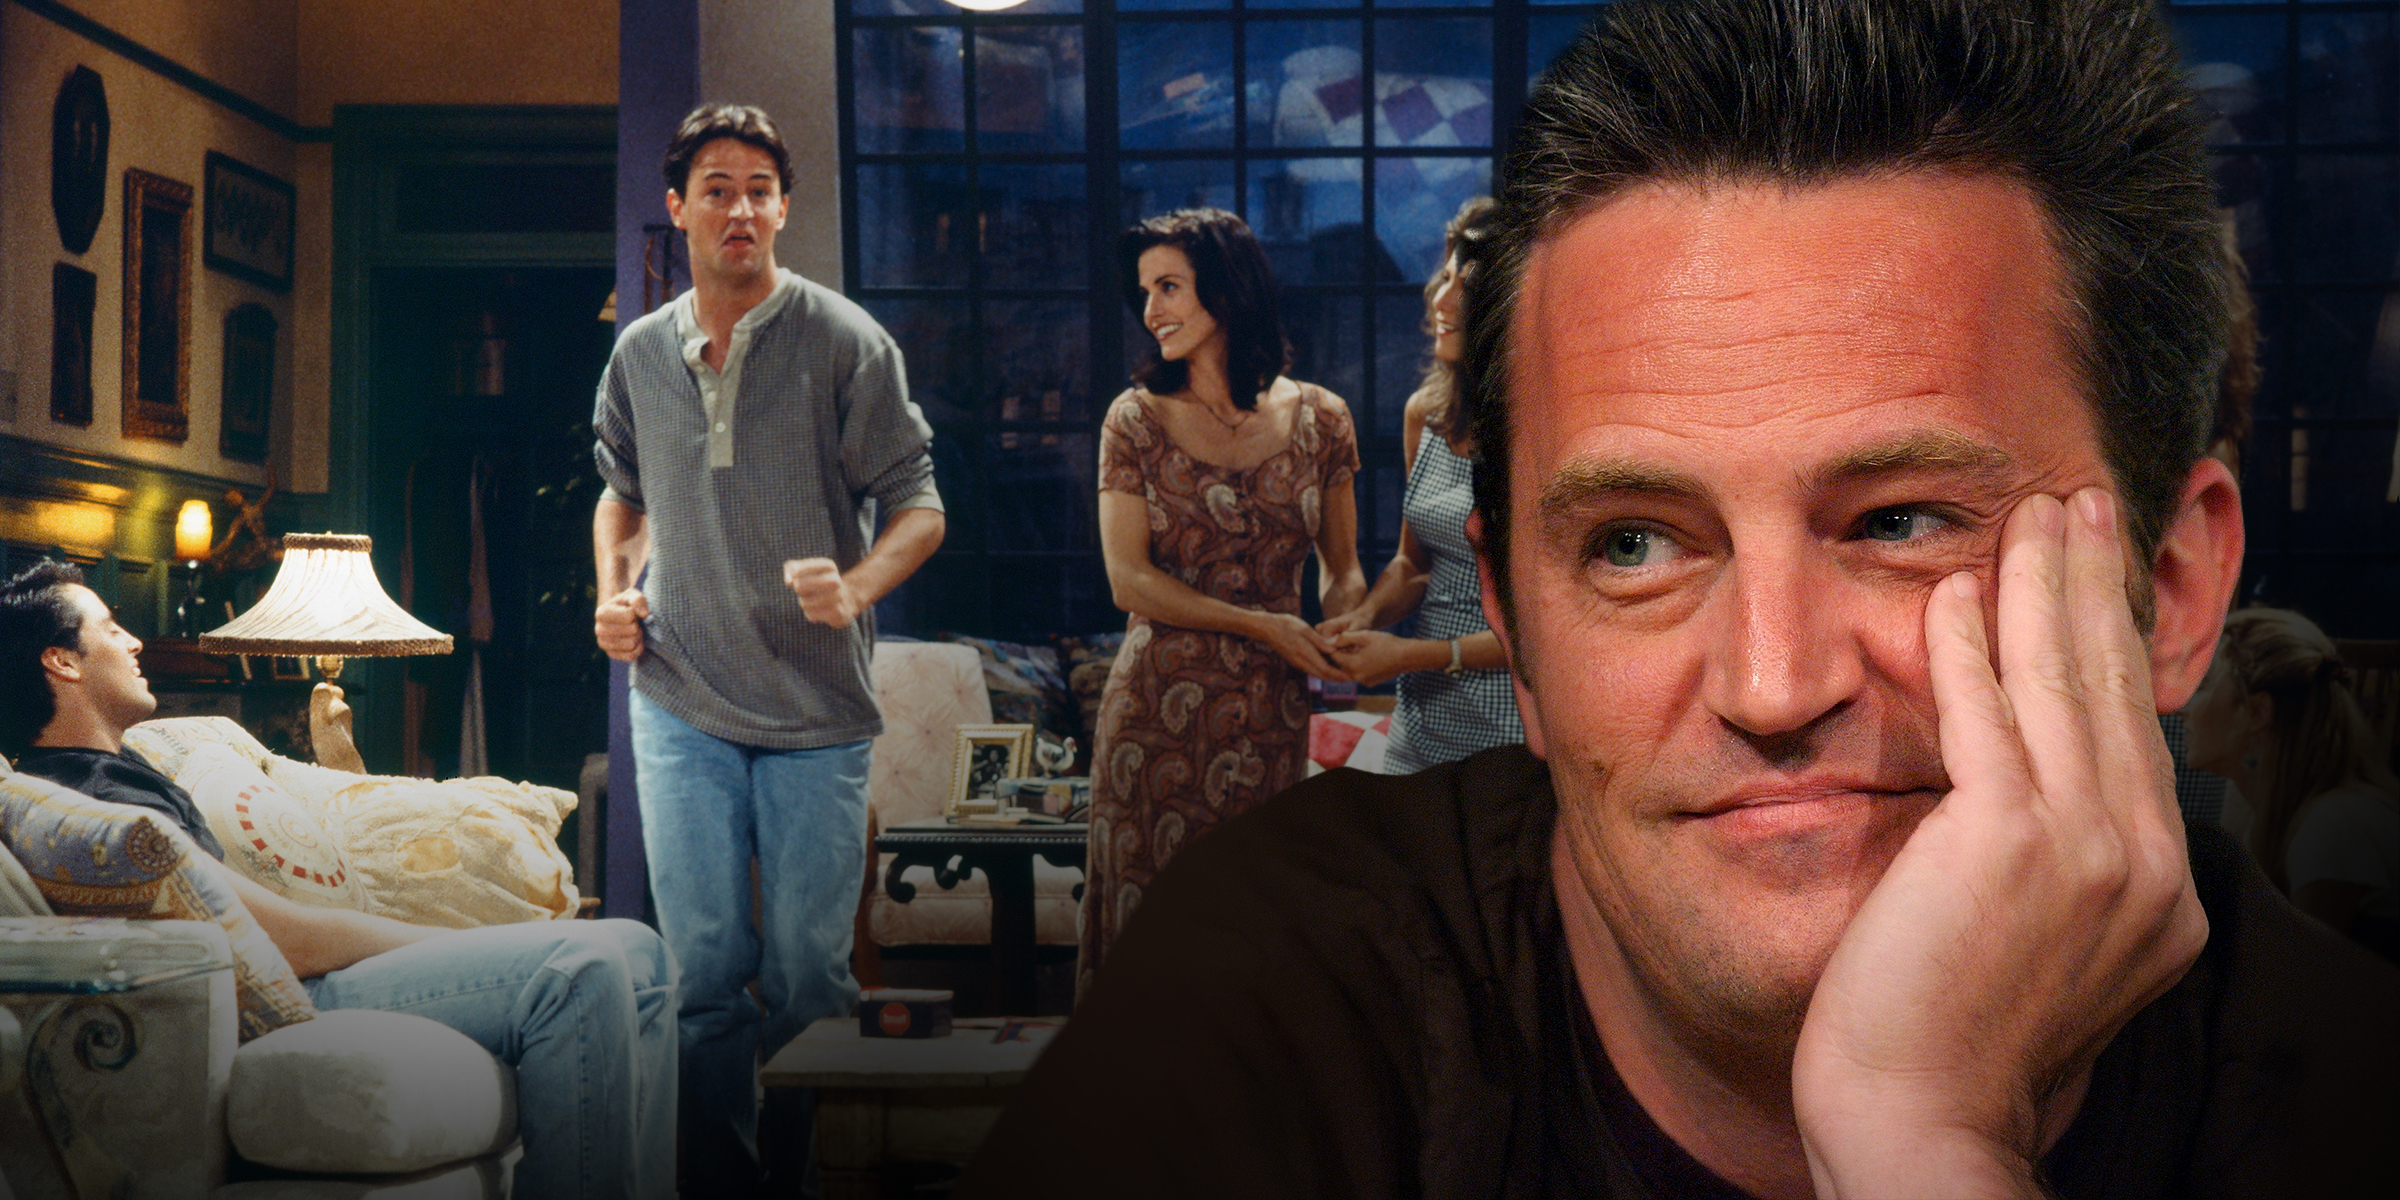 Matthew Perry | Source: Getty Images / Friends